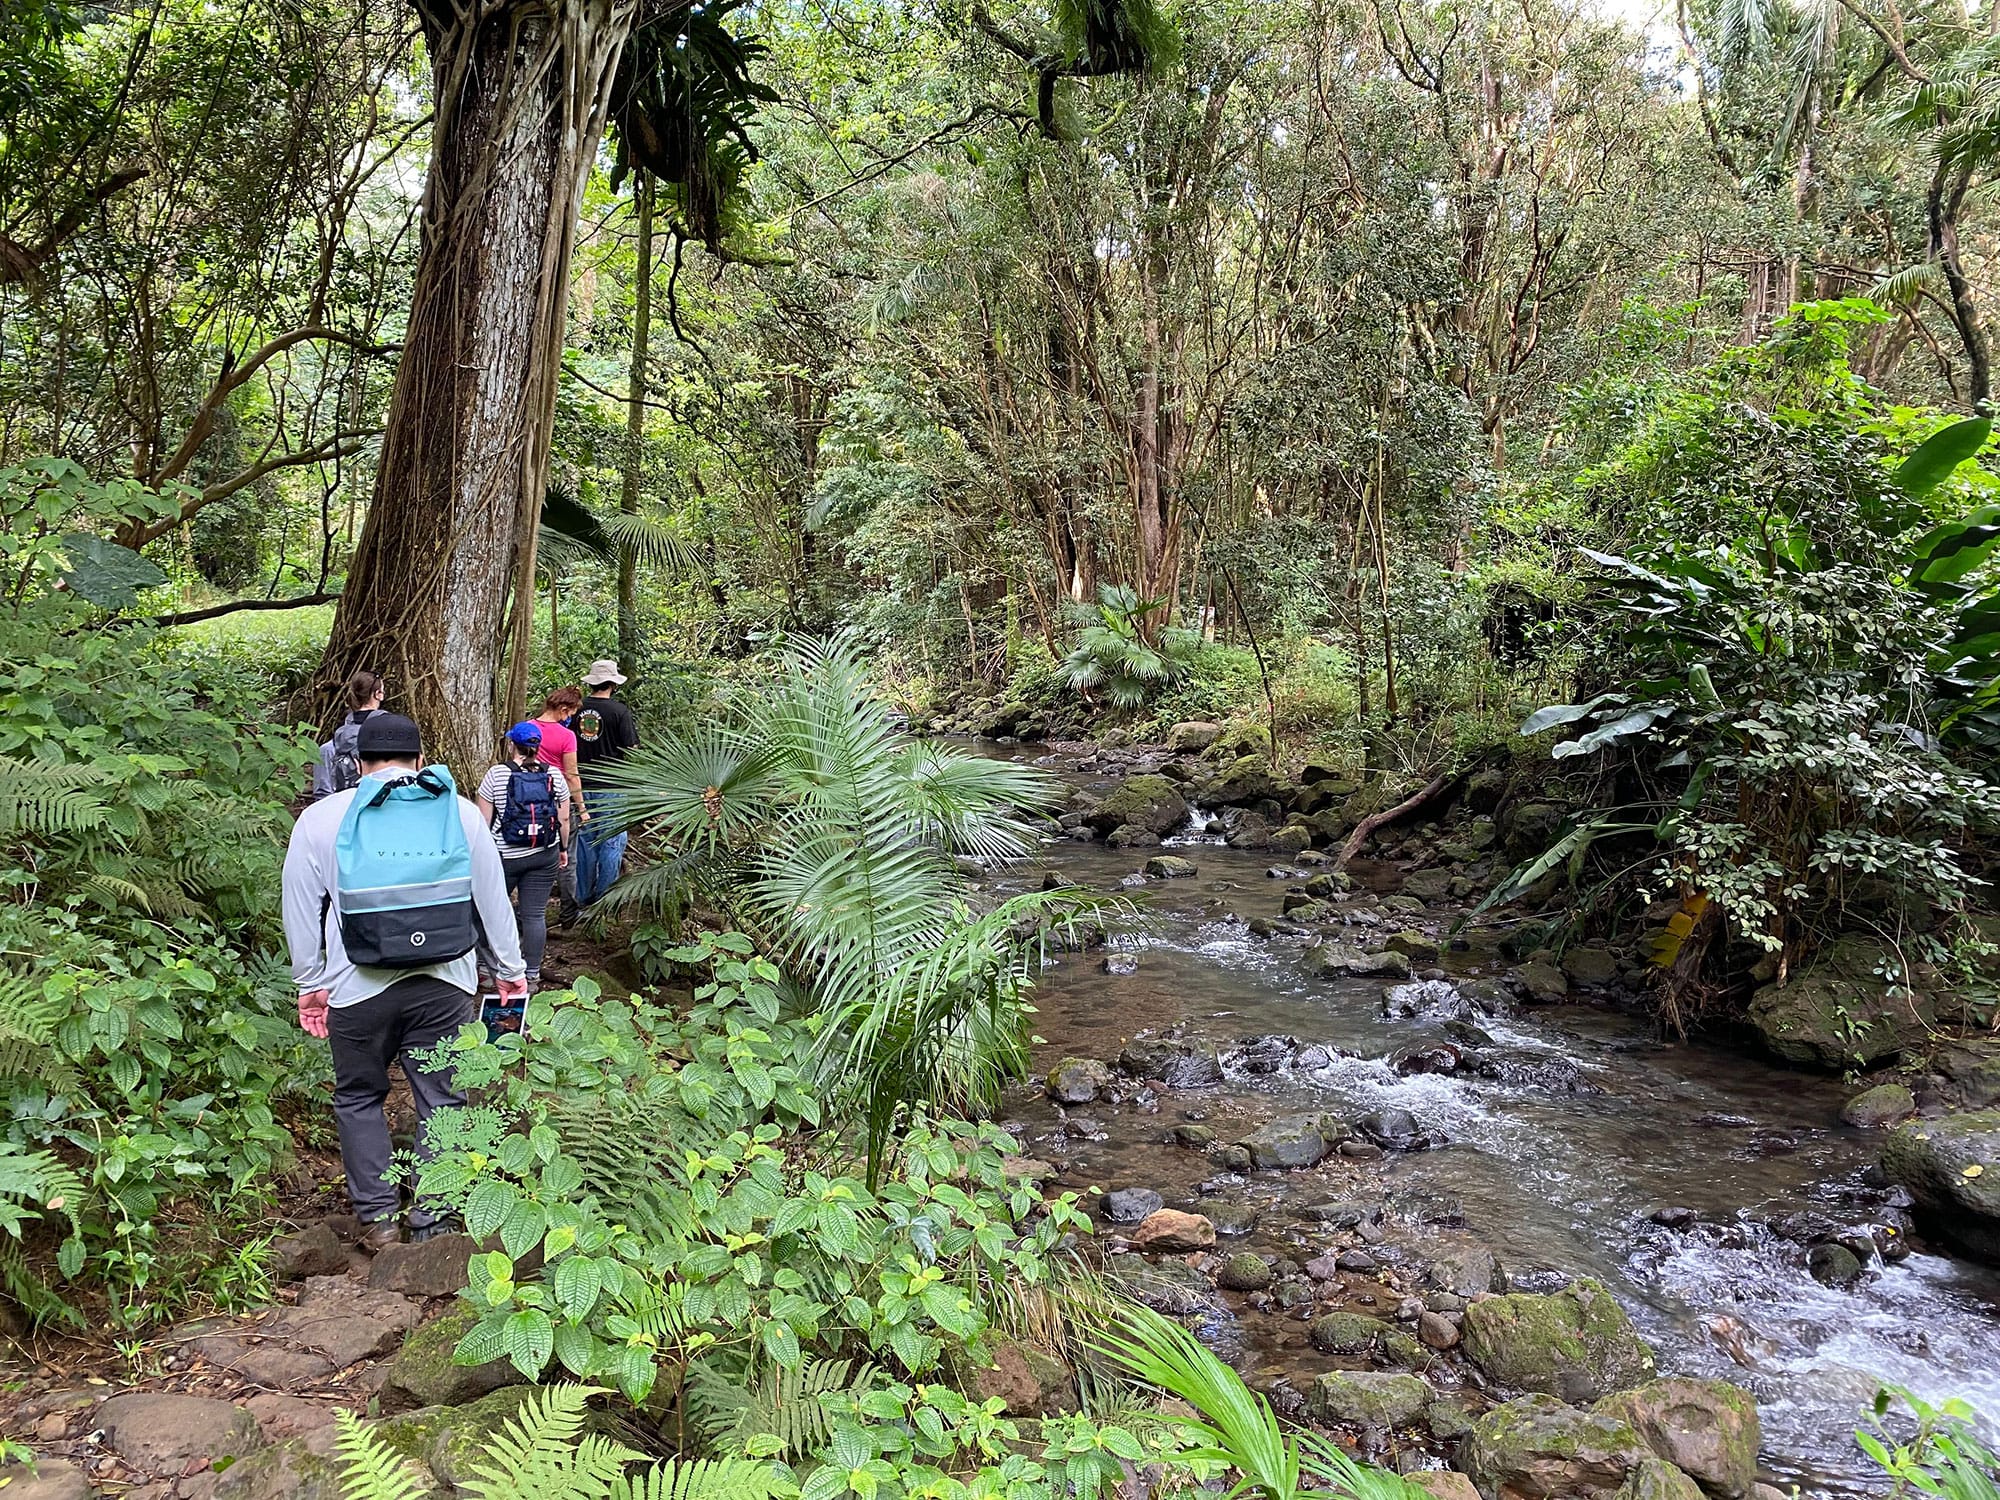 A group of hikers walking along a stream in the jungle.